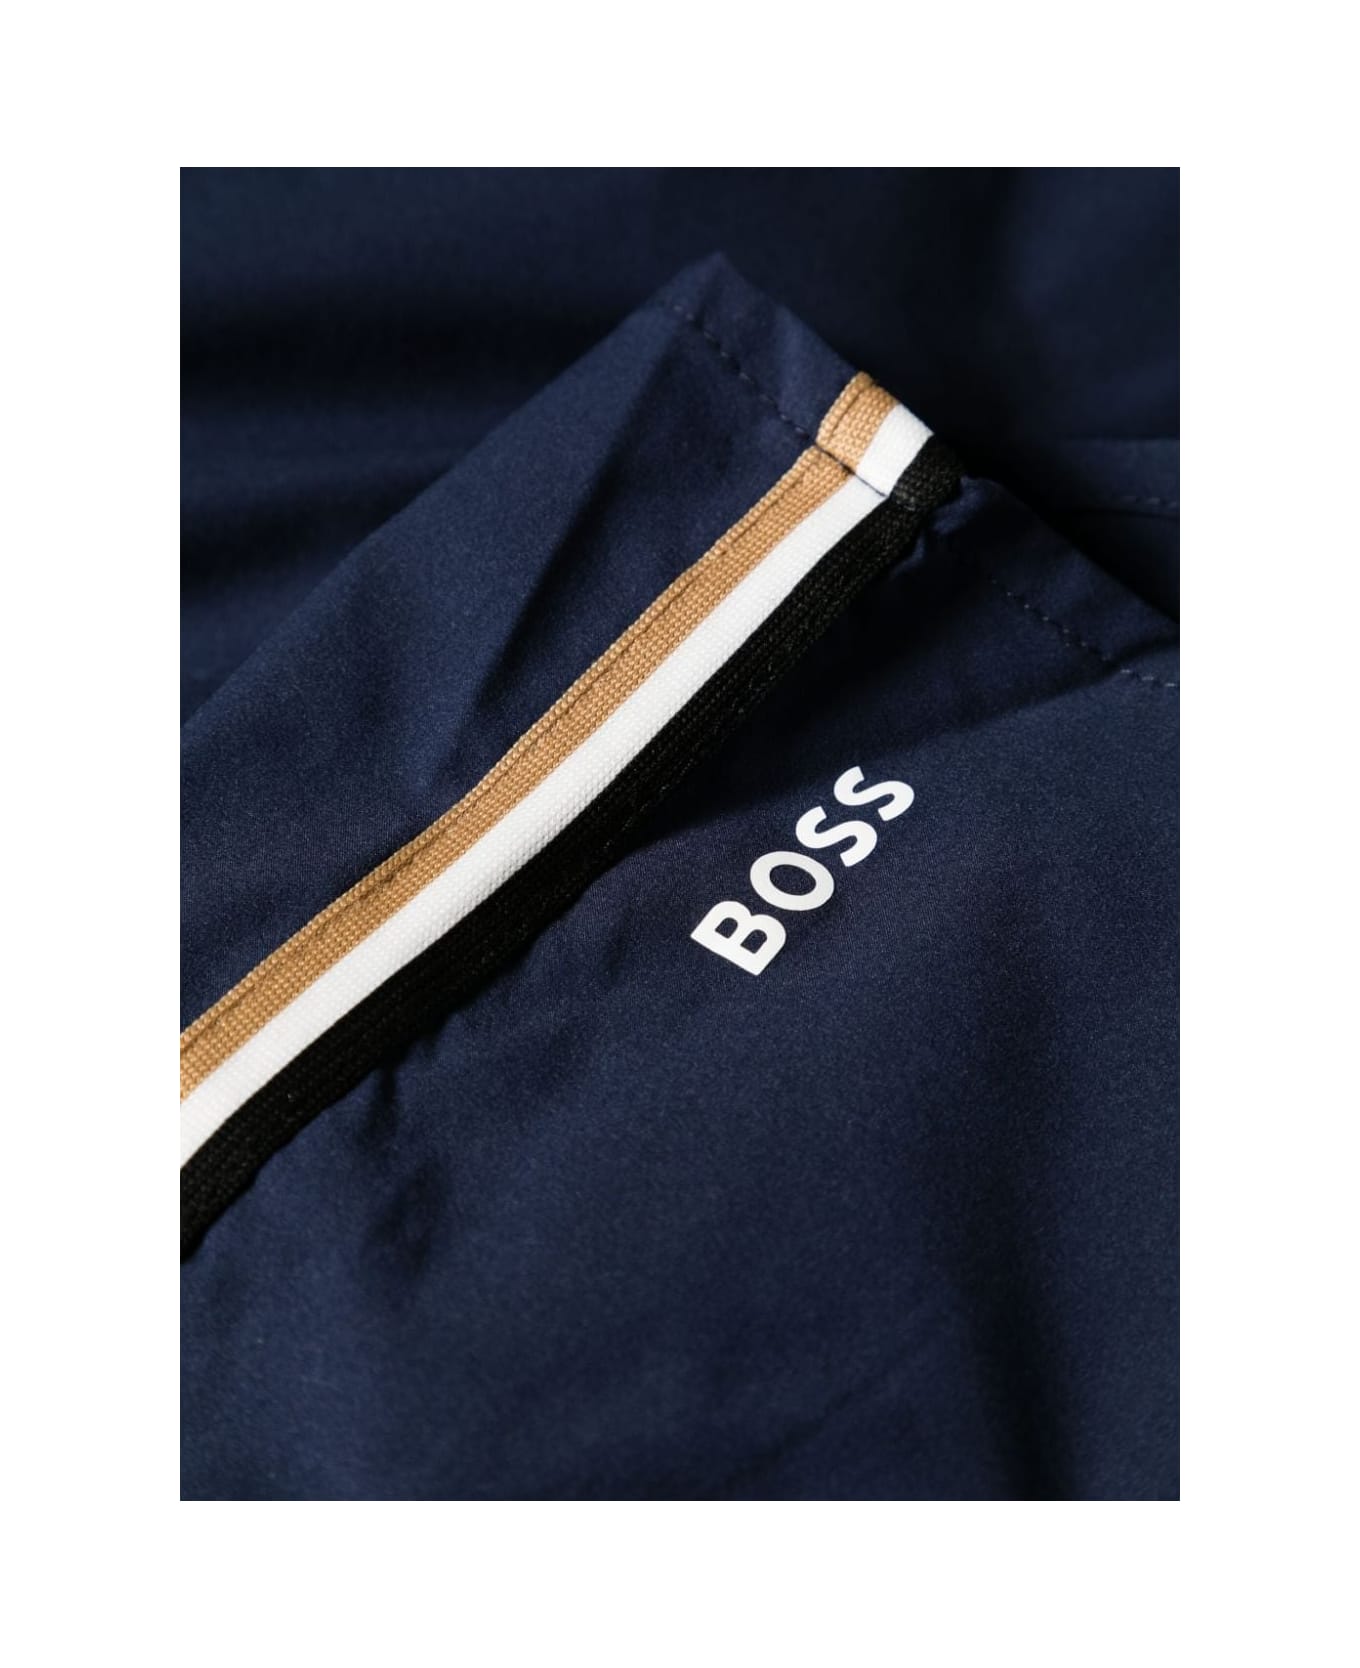 Hugo Boss Black Beach Boxers With Typical Brand Stripes And Logo - Black